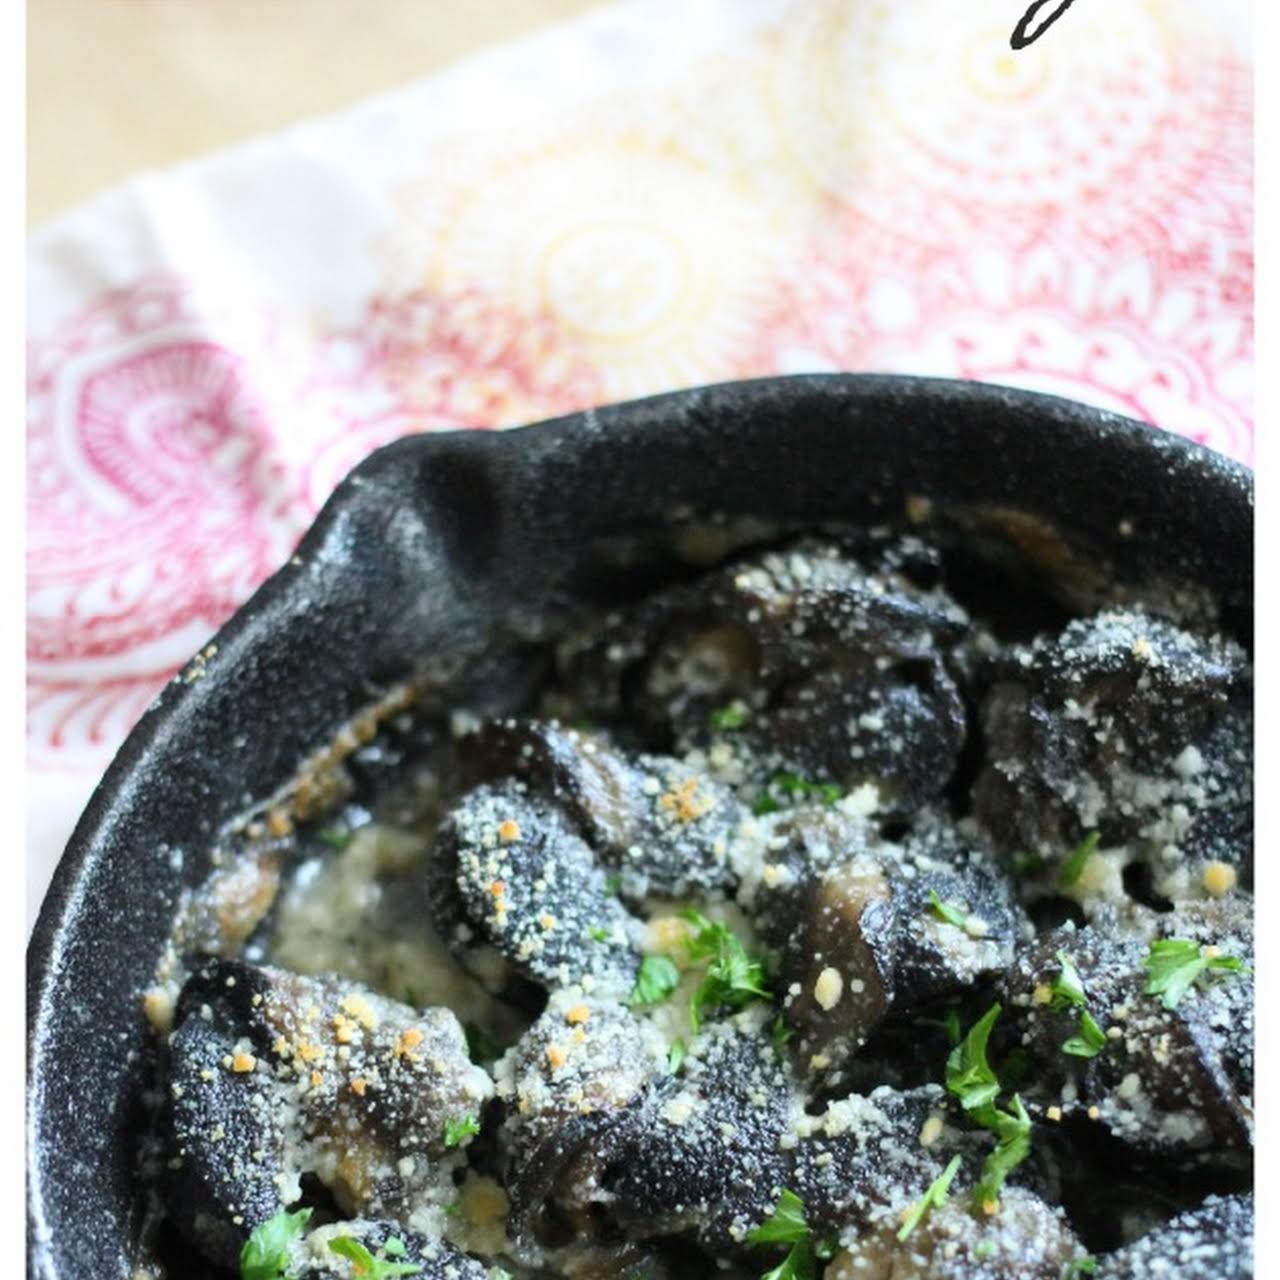 Cantonese-Style Periwinkle Snails in Black Bean Sauce - The Woks of Life